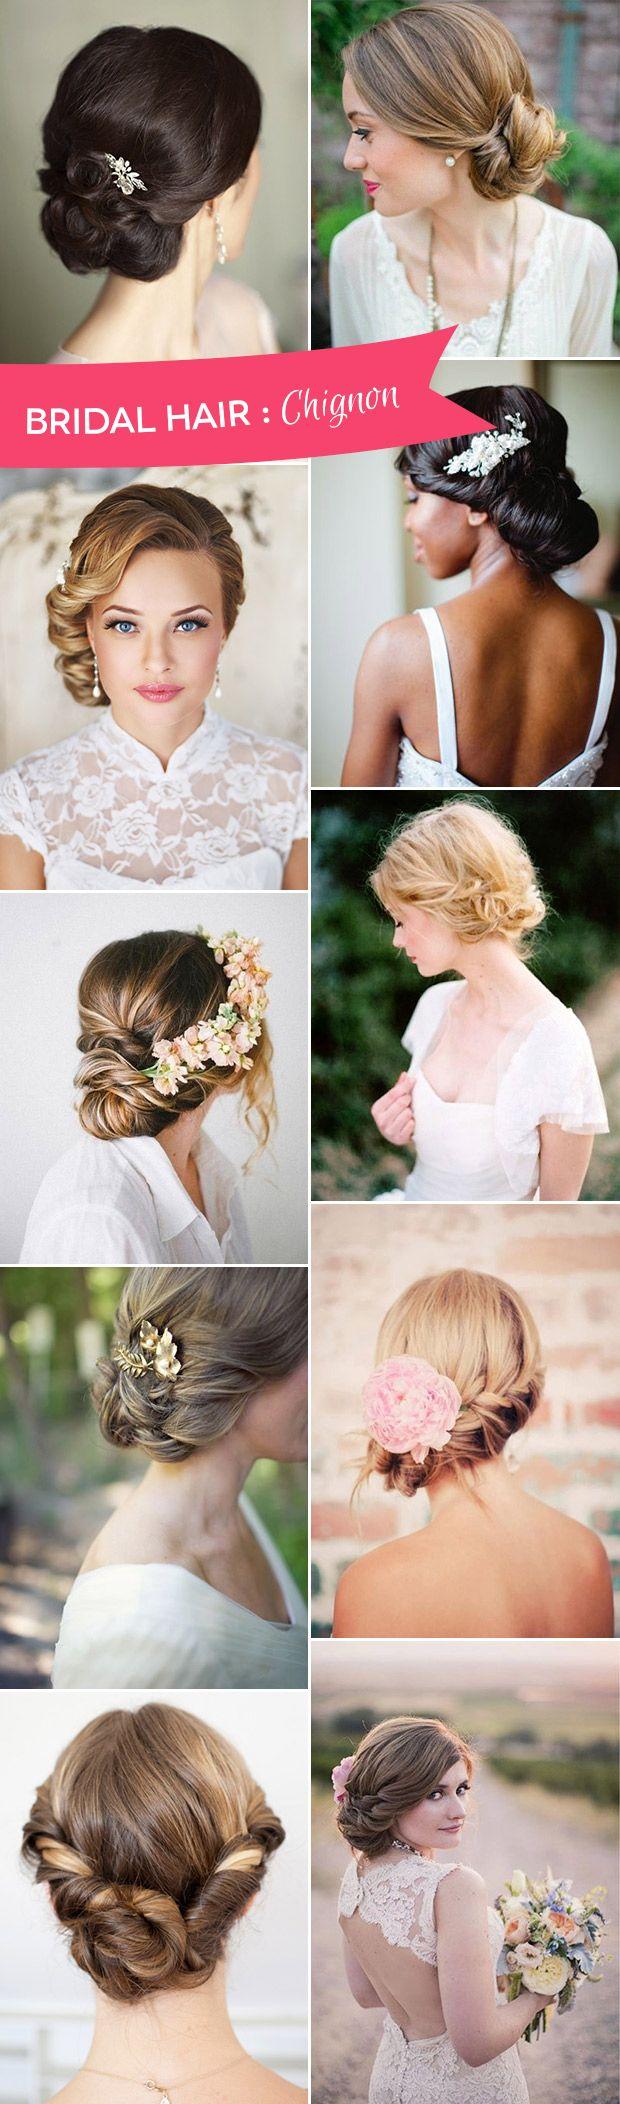 Mariage - The Charm Of Chignons - The Simplest Wedding Hairstyle